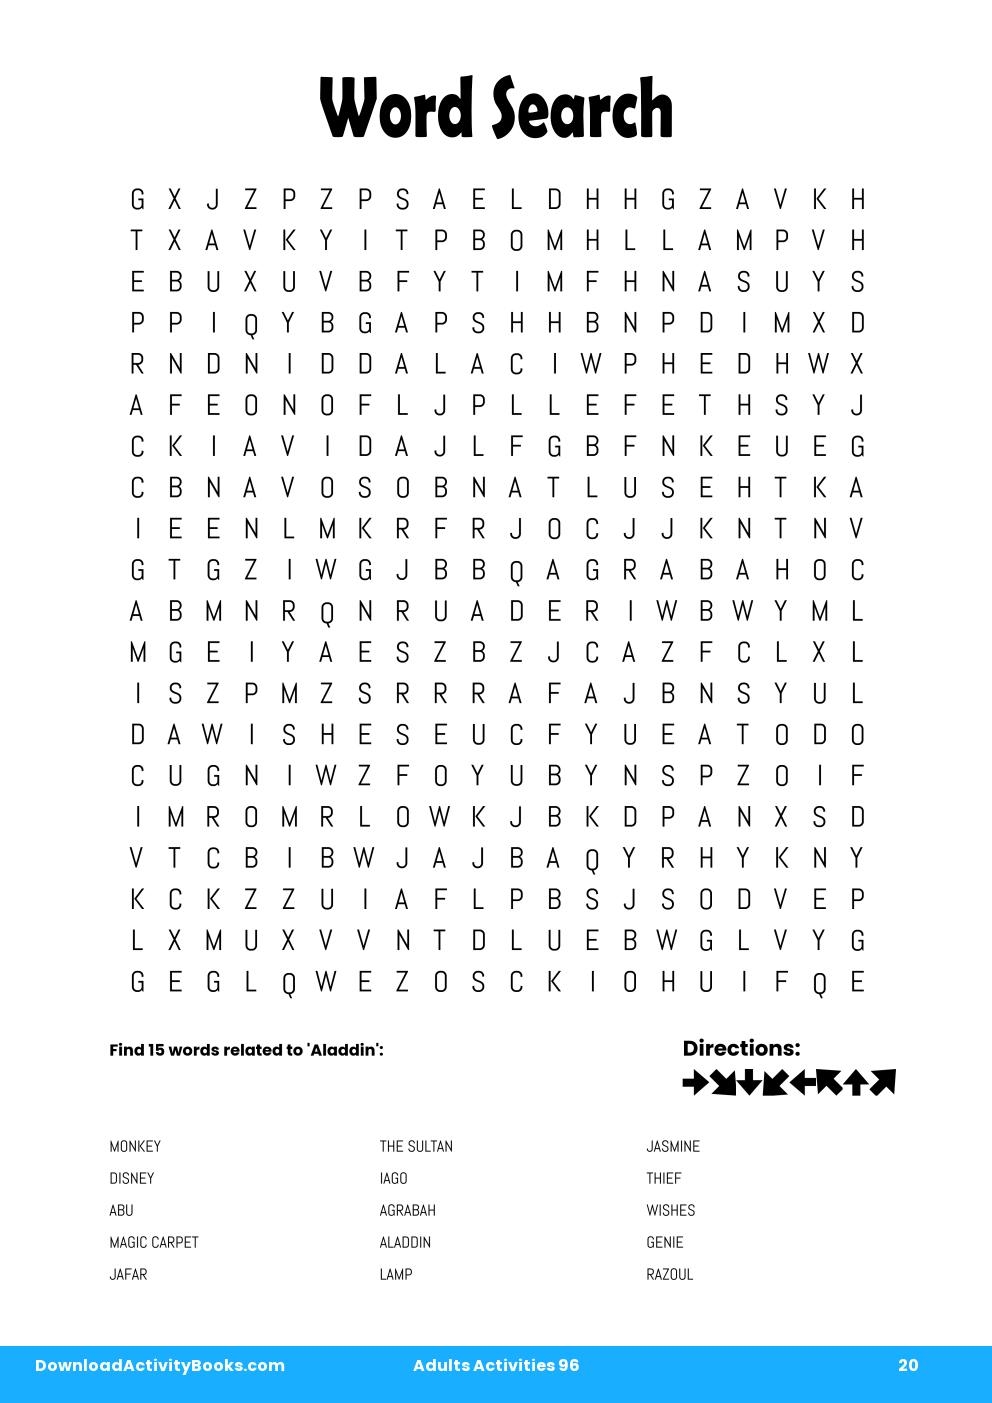 Word Search in Adults Activities 96